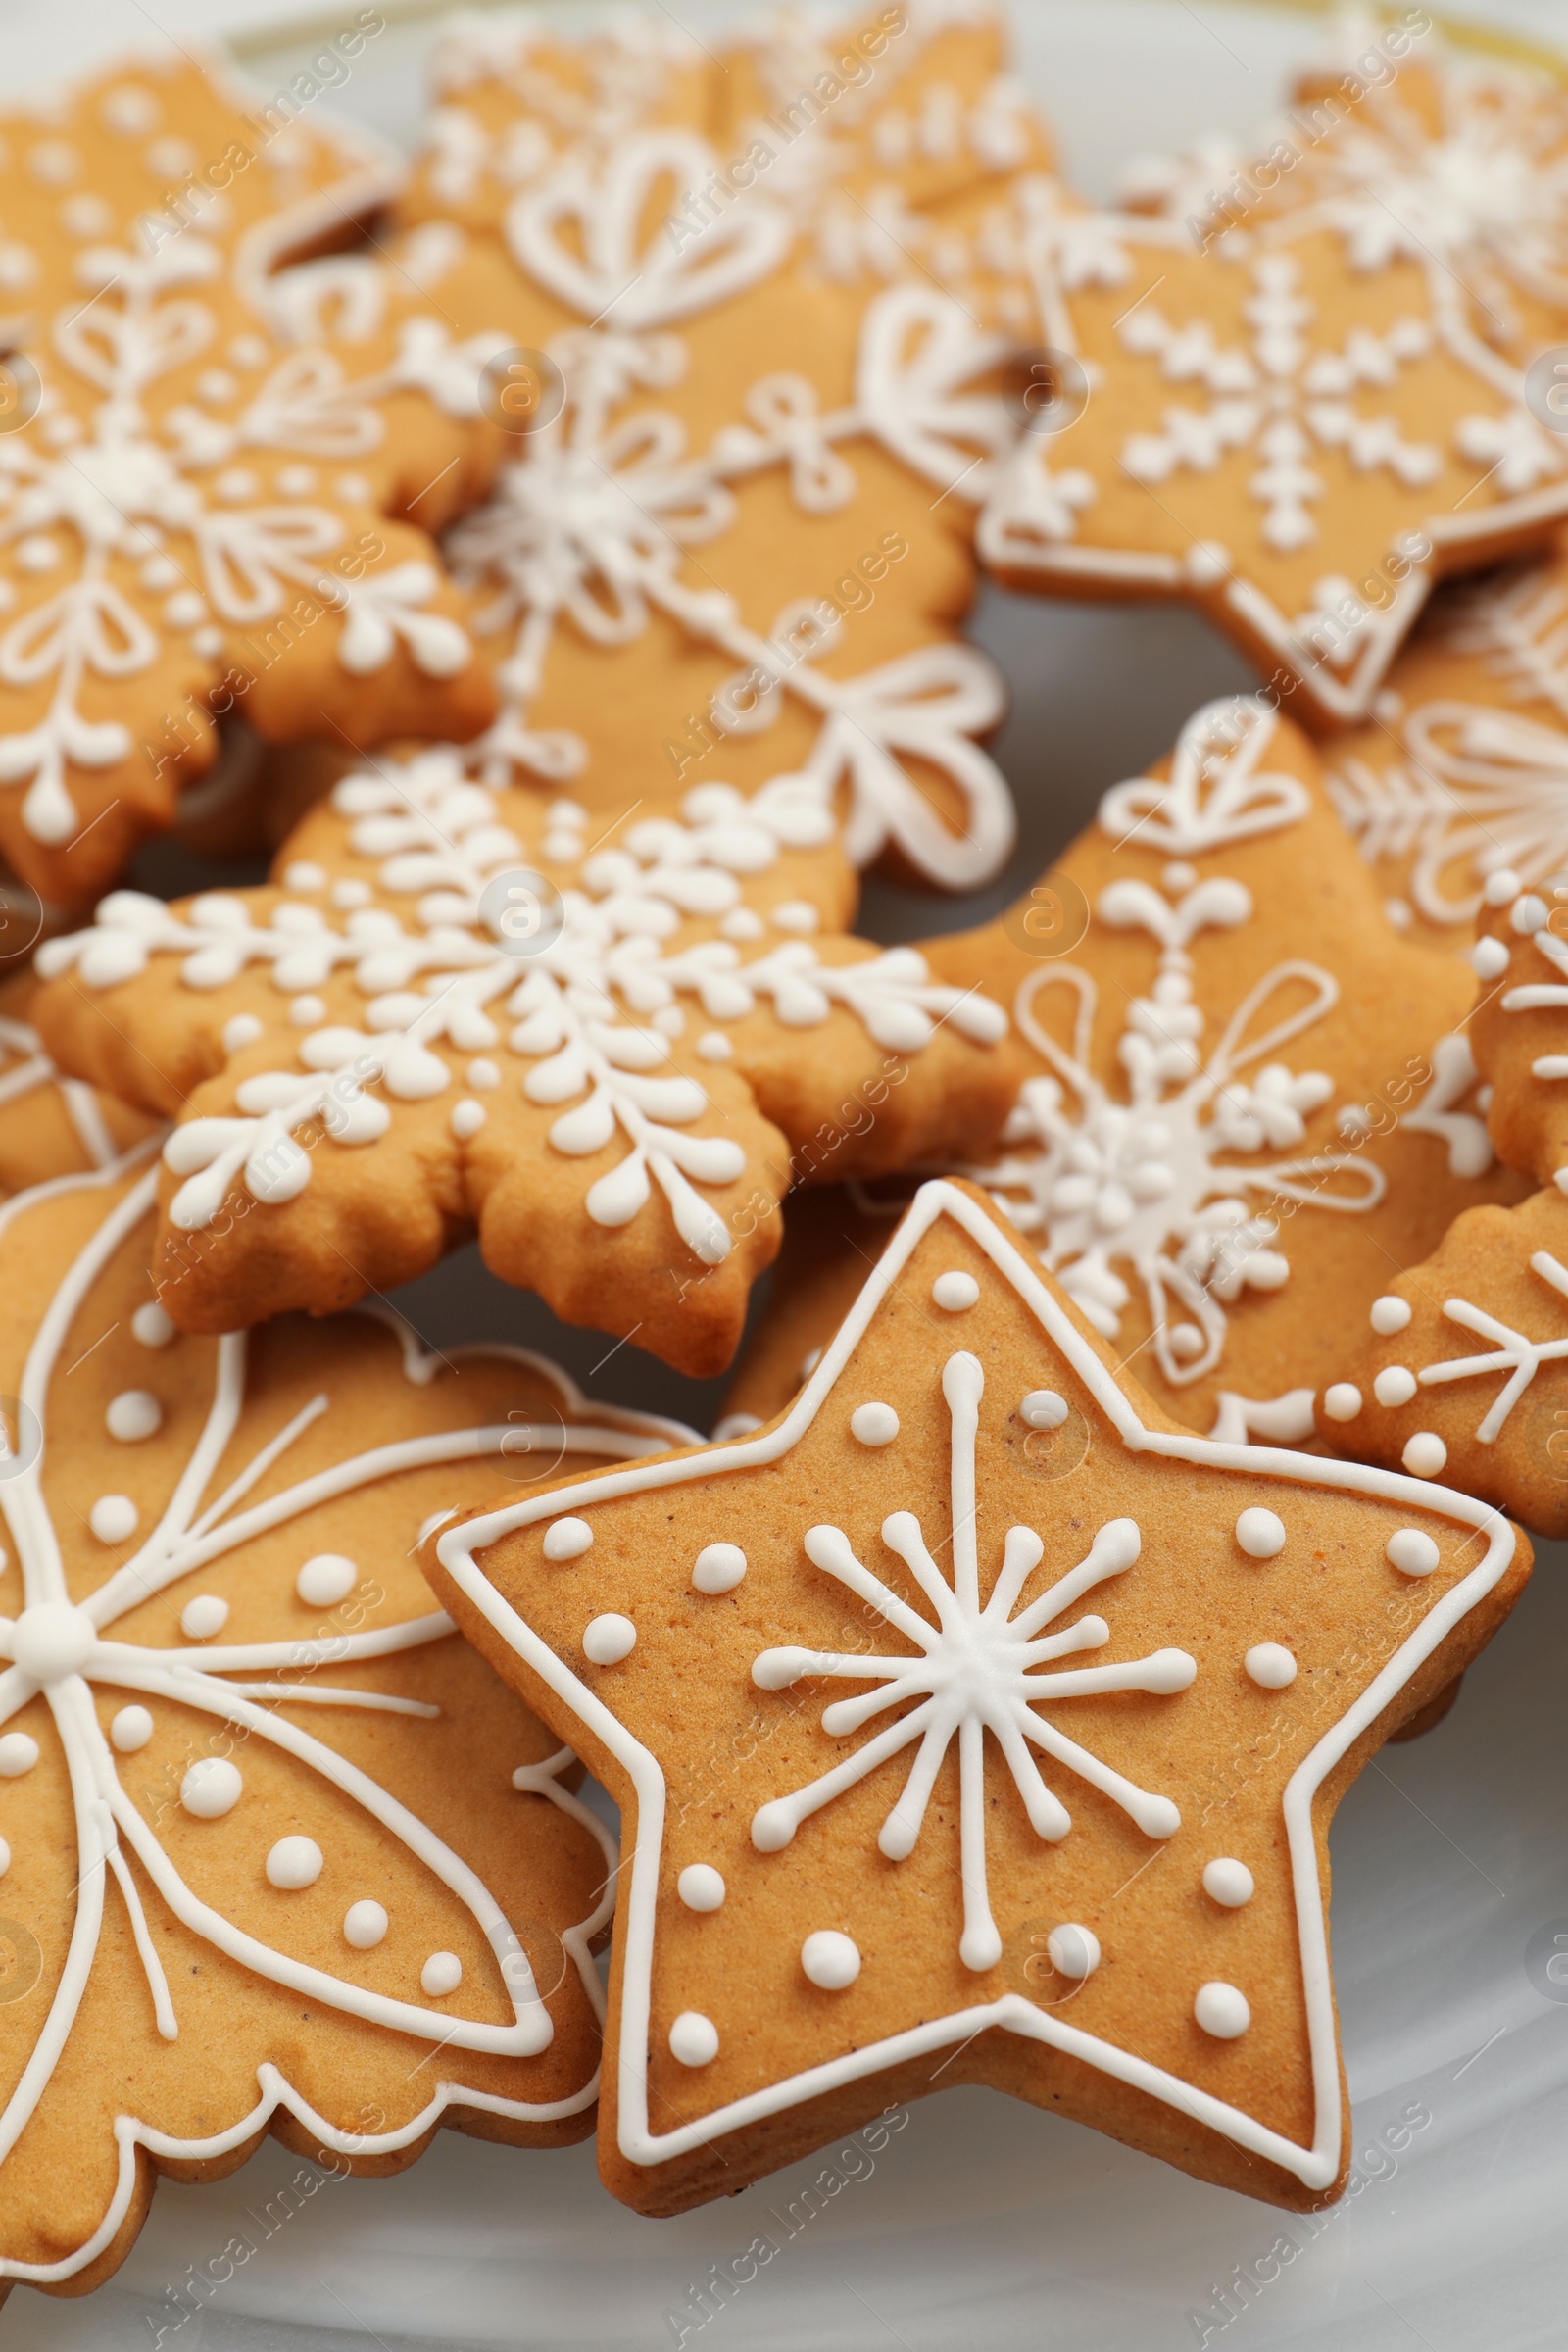 Photo of Tasty Christmas cookies on plate, closeup view